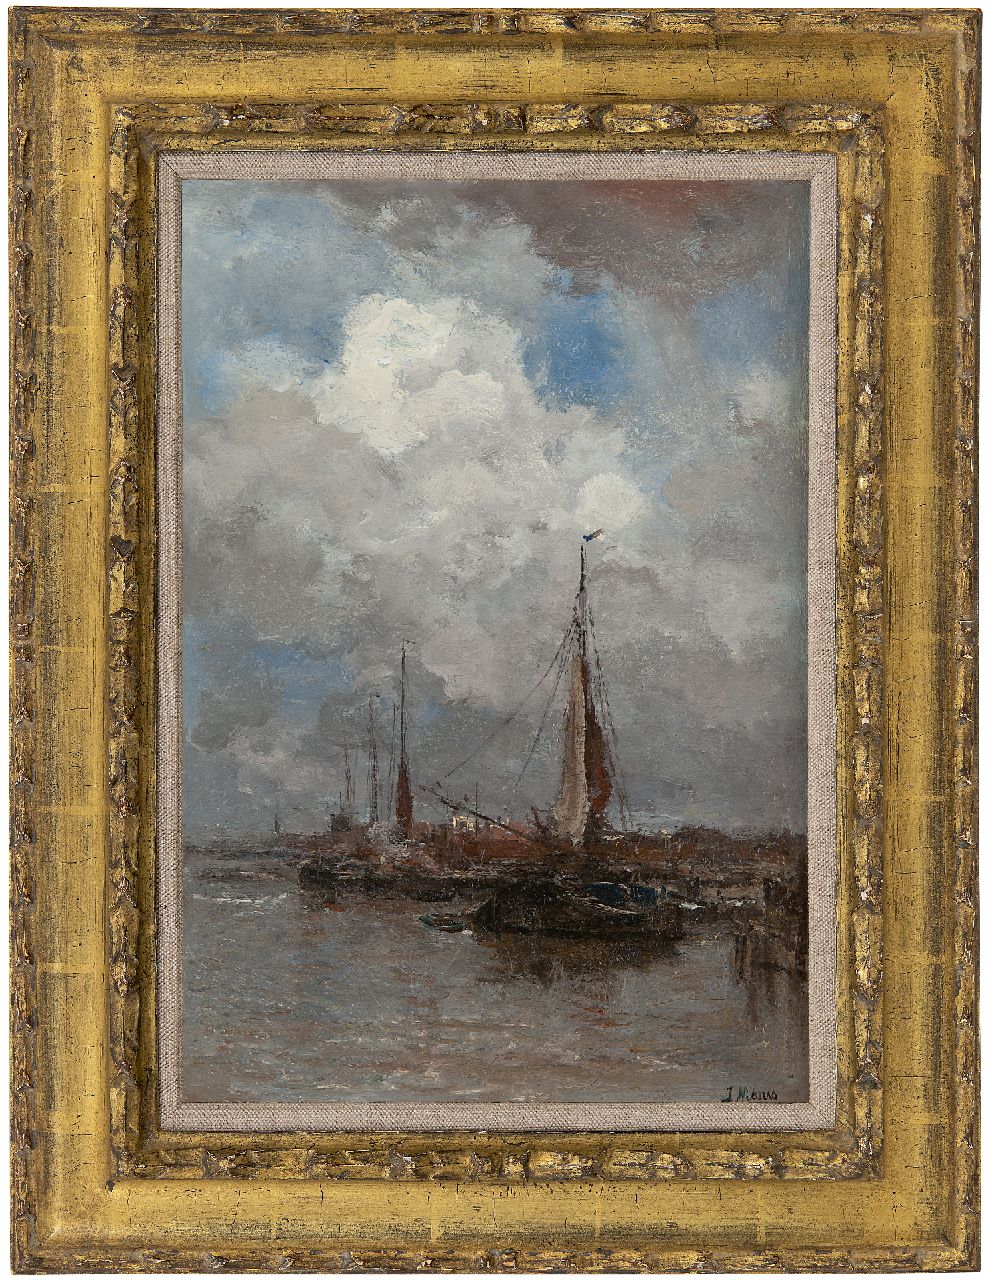 Maris J.H.  | Jacobus Hendricus 'Jacob' Maris | Paintings offered for sale | A fishing harbour, oil on canvas 44.9 x 30.6 cm, signed l.r.